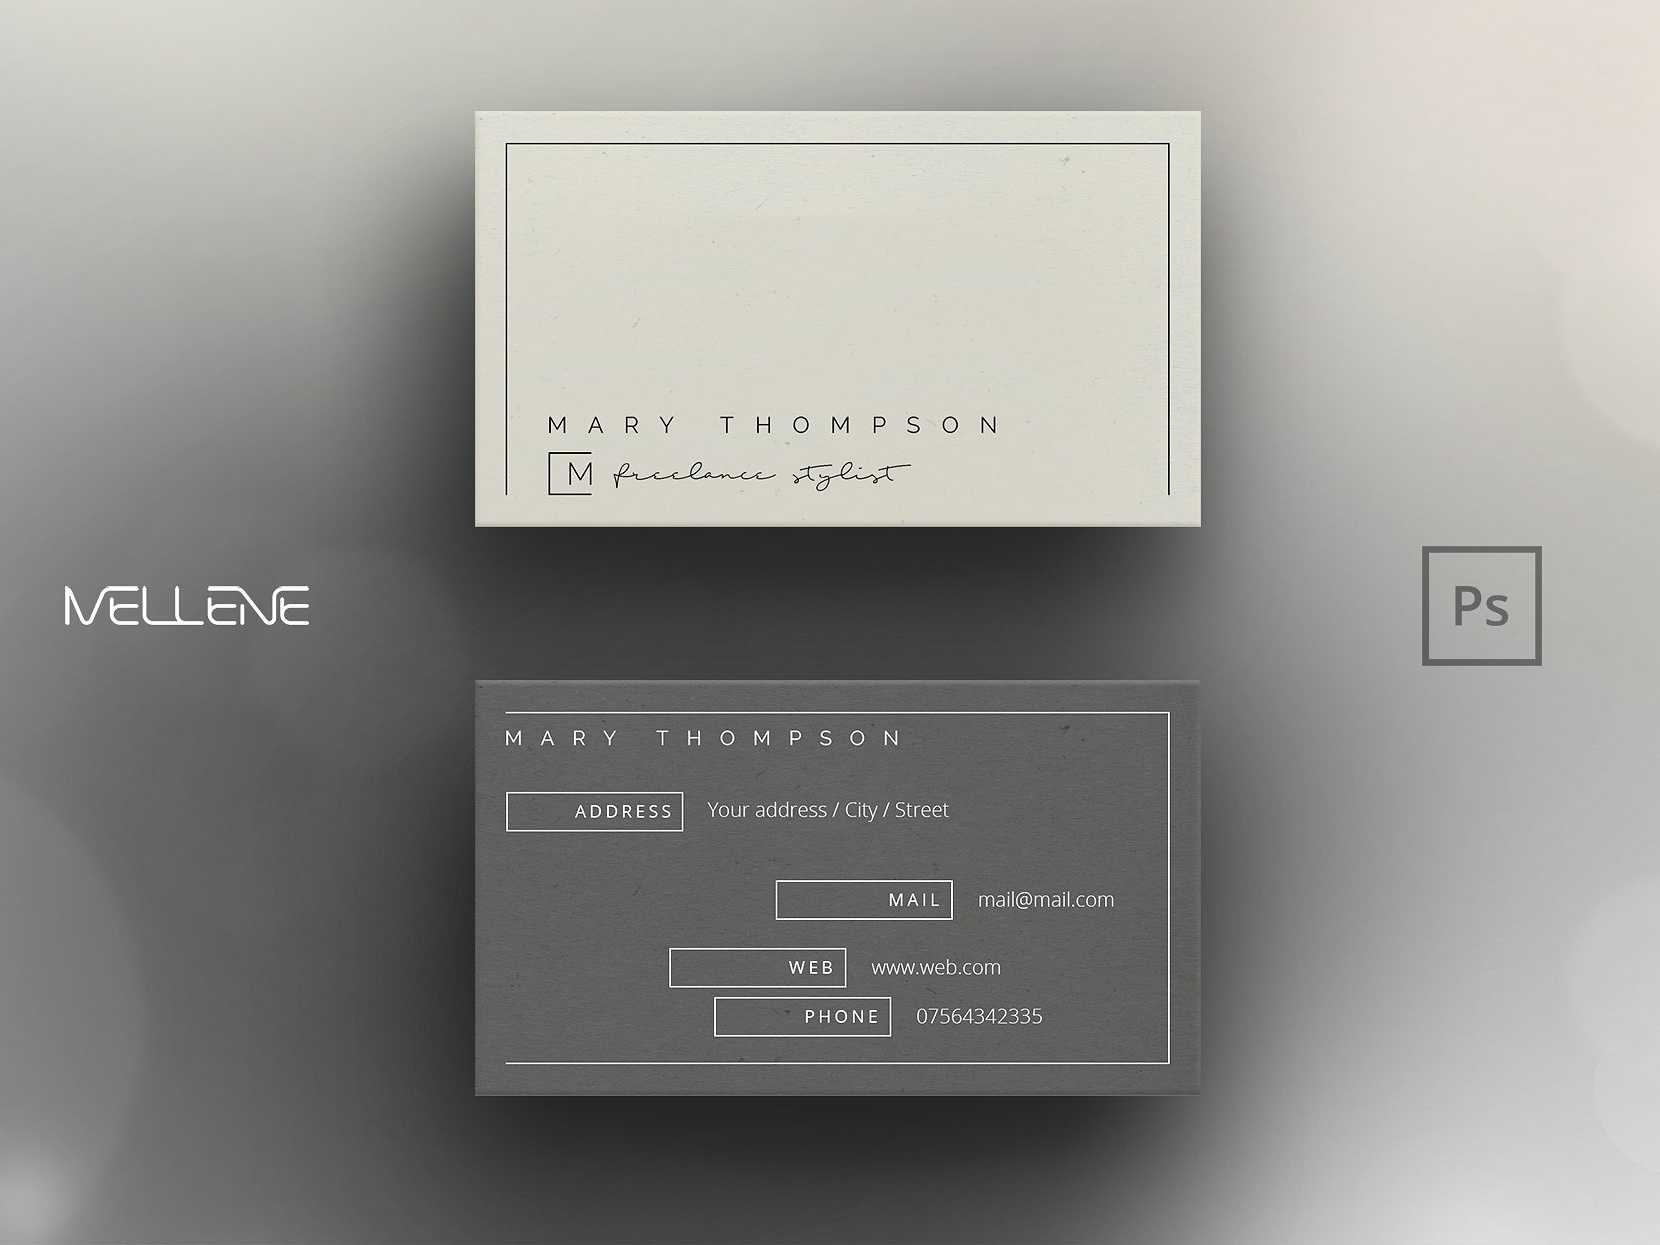 Business Card Template For Photoshopbusiness Cards On Throughout Name Card Template Photoshop